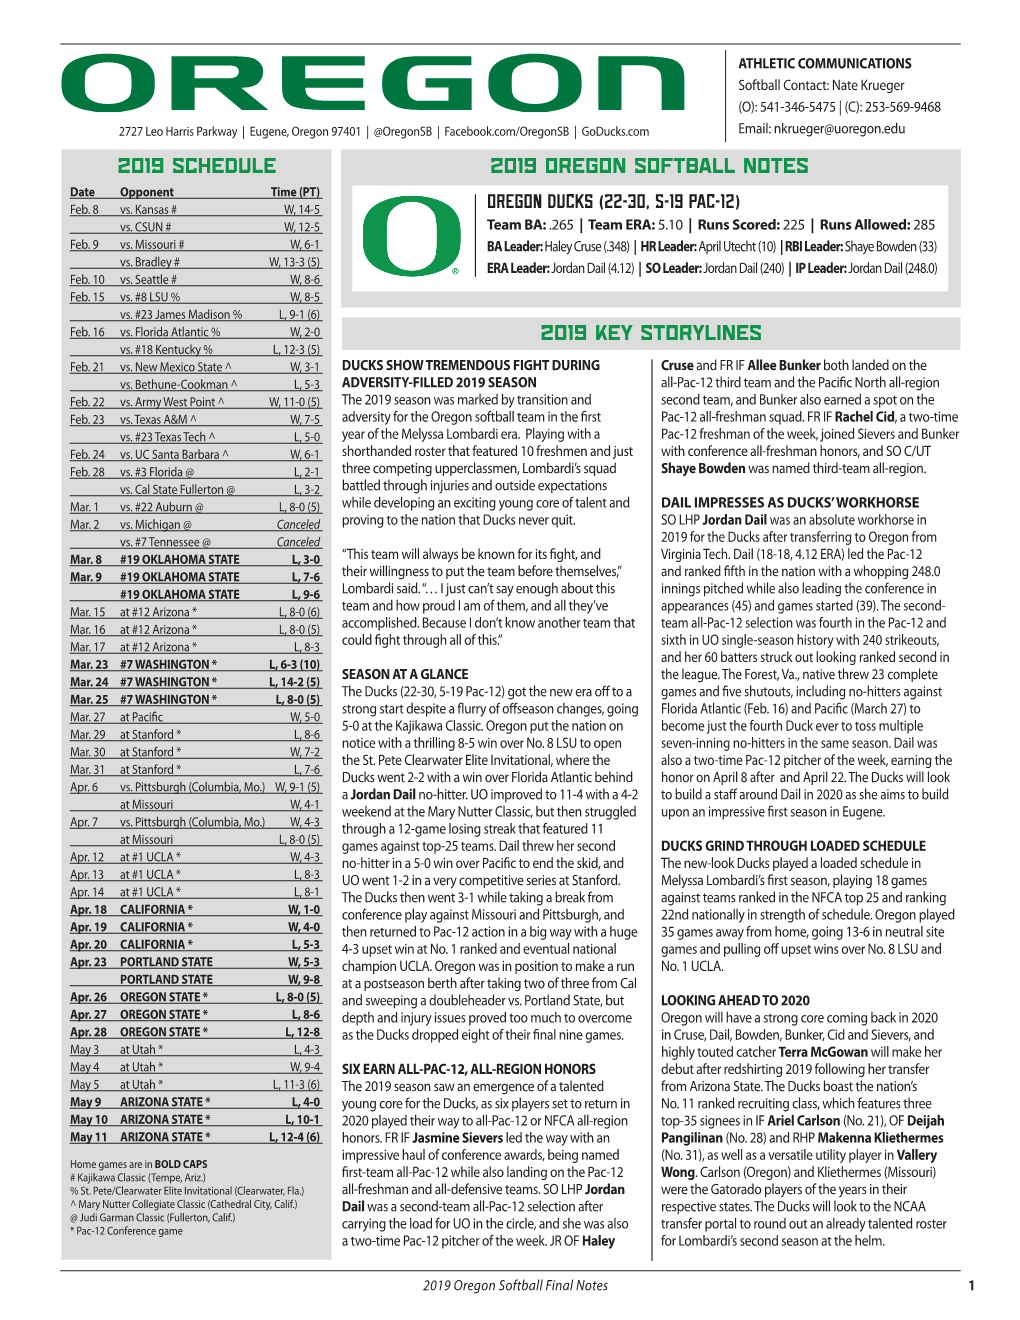 2019 Oregon Softball Notes 2019 SCHEDULE 2019 Key Storylines